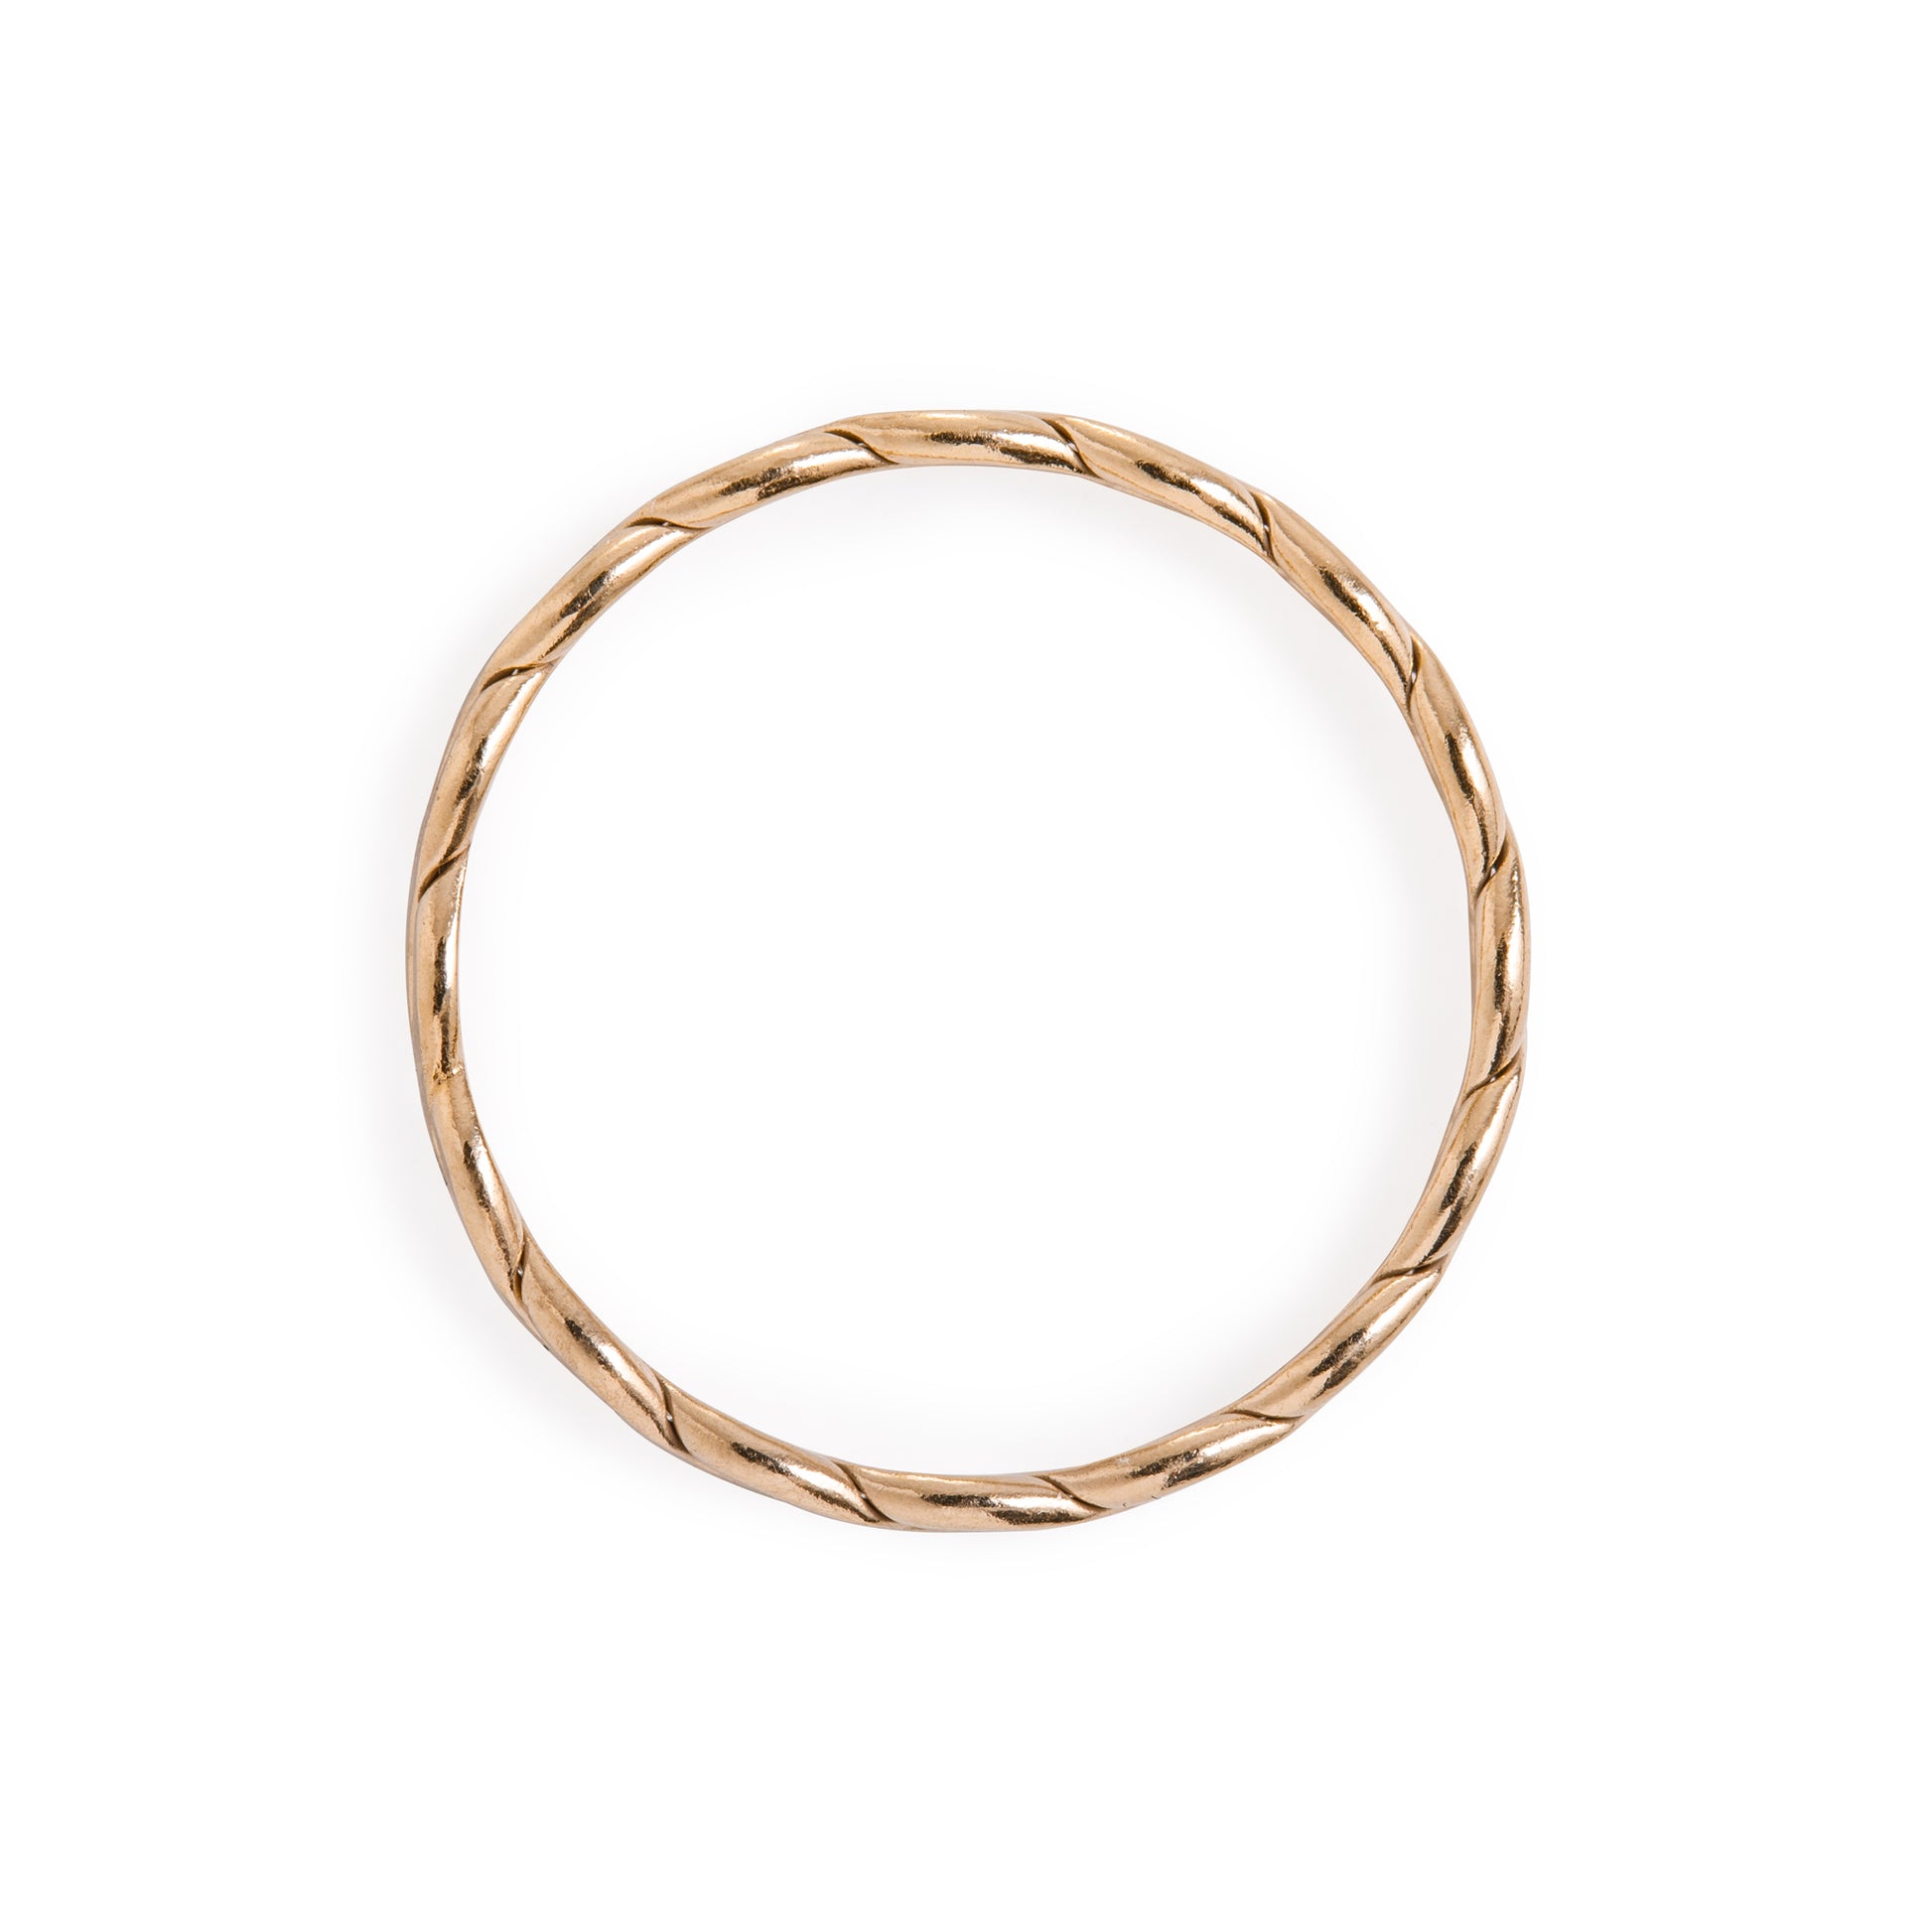 Minimal Gold Woven Braided Ring